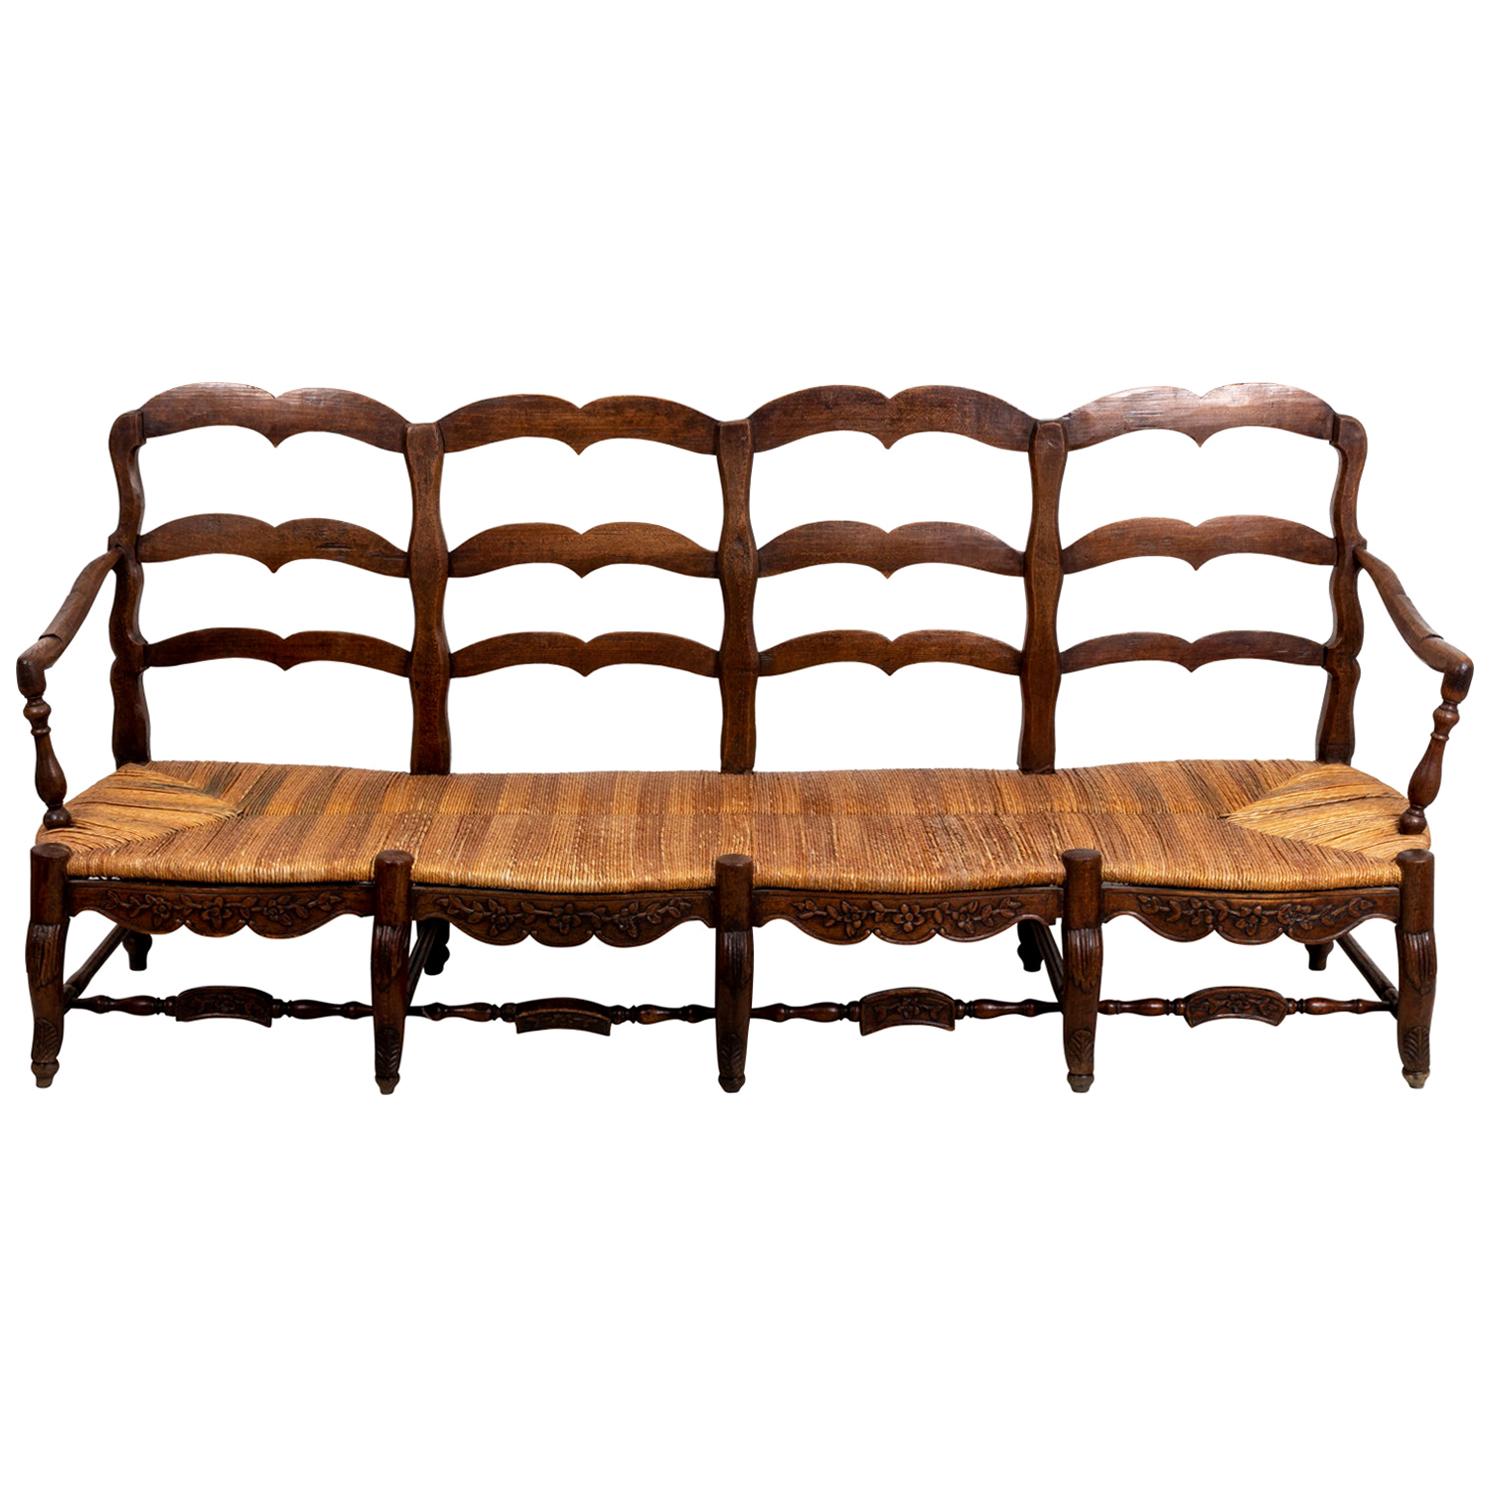 19th Century French Oak Rushed Seat Settee